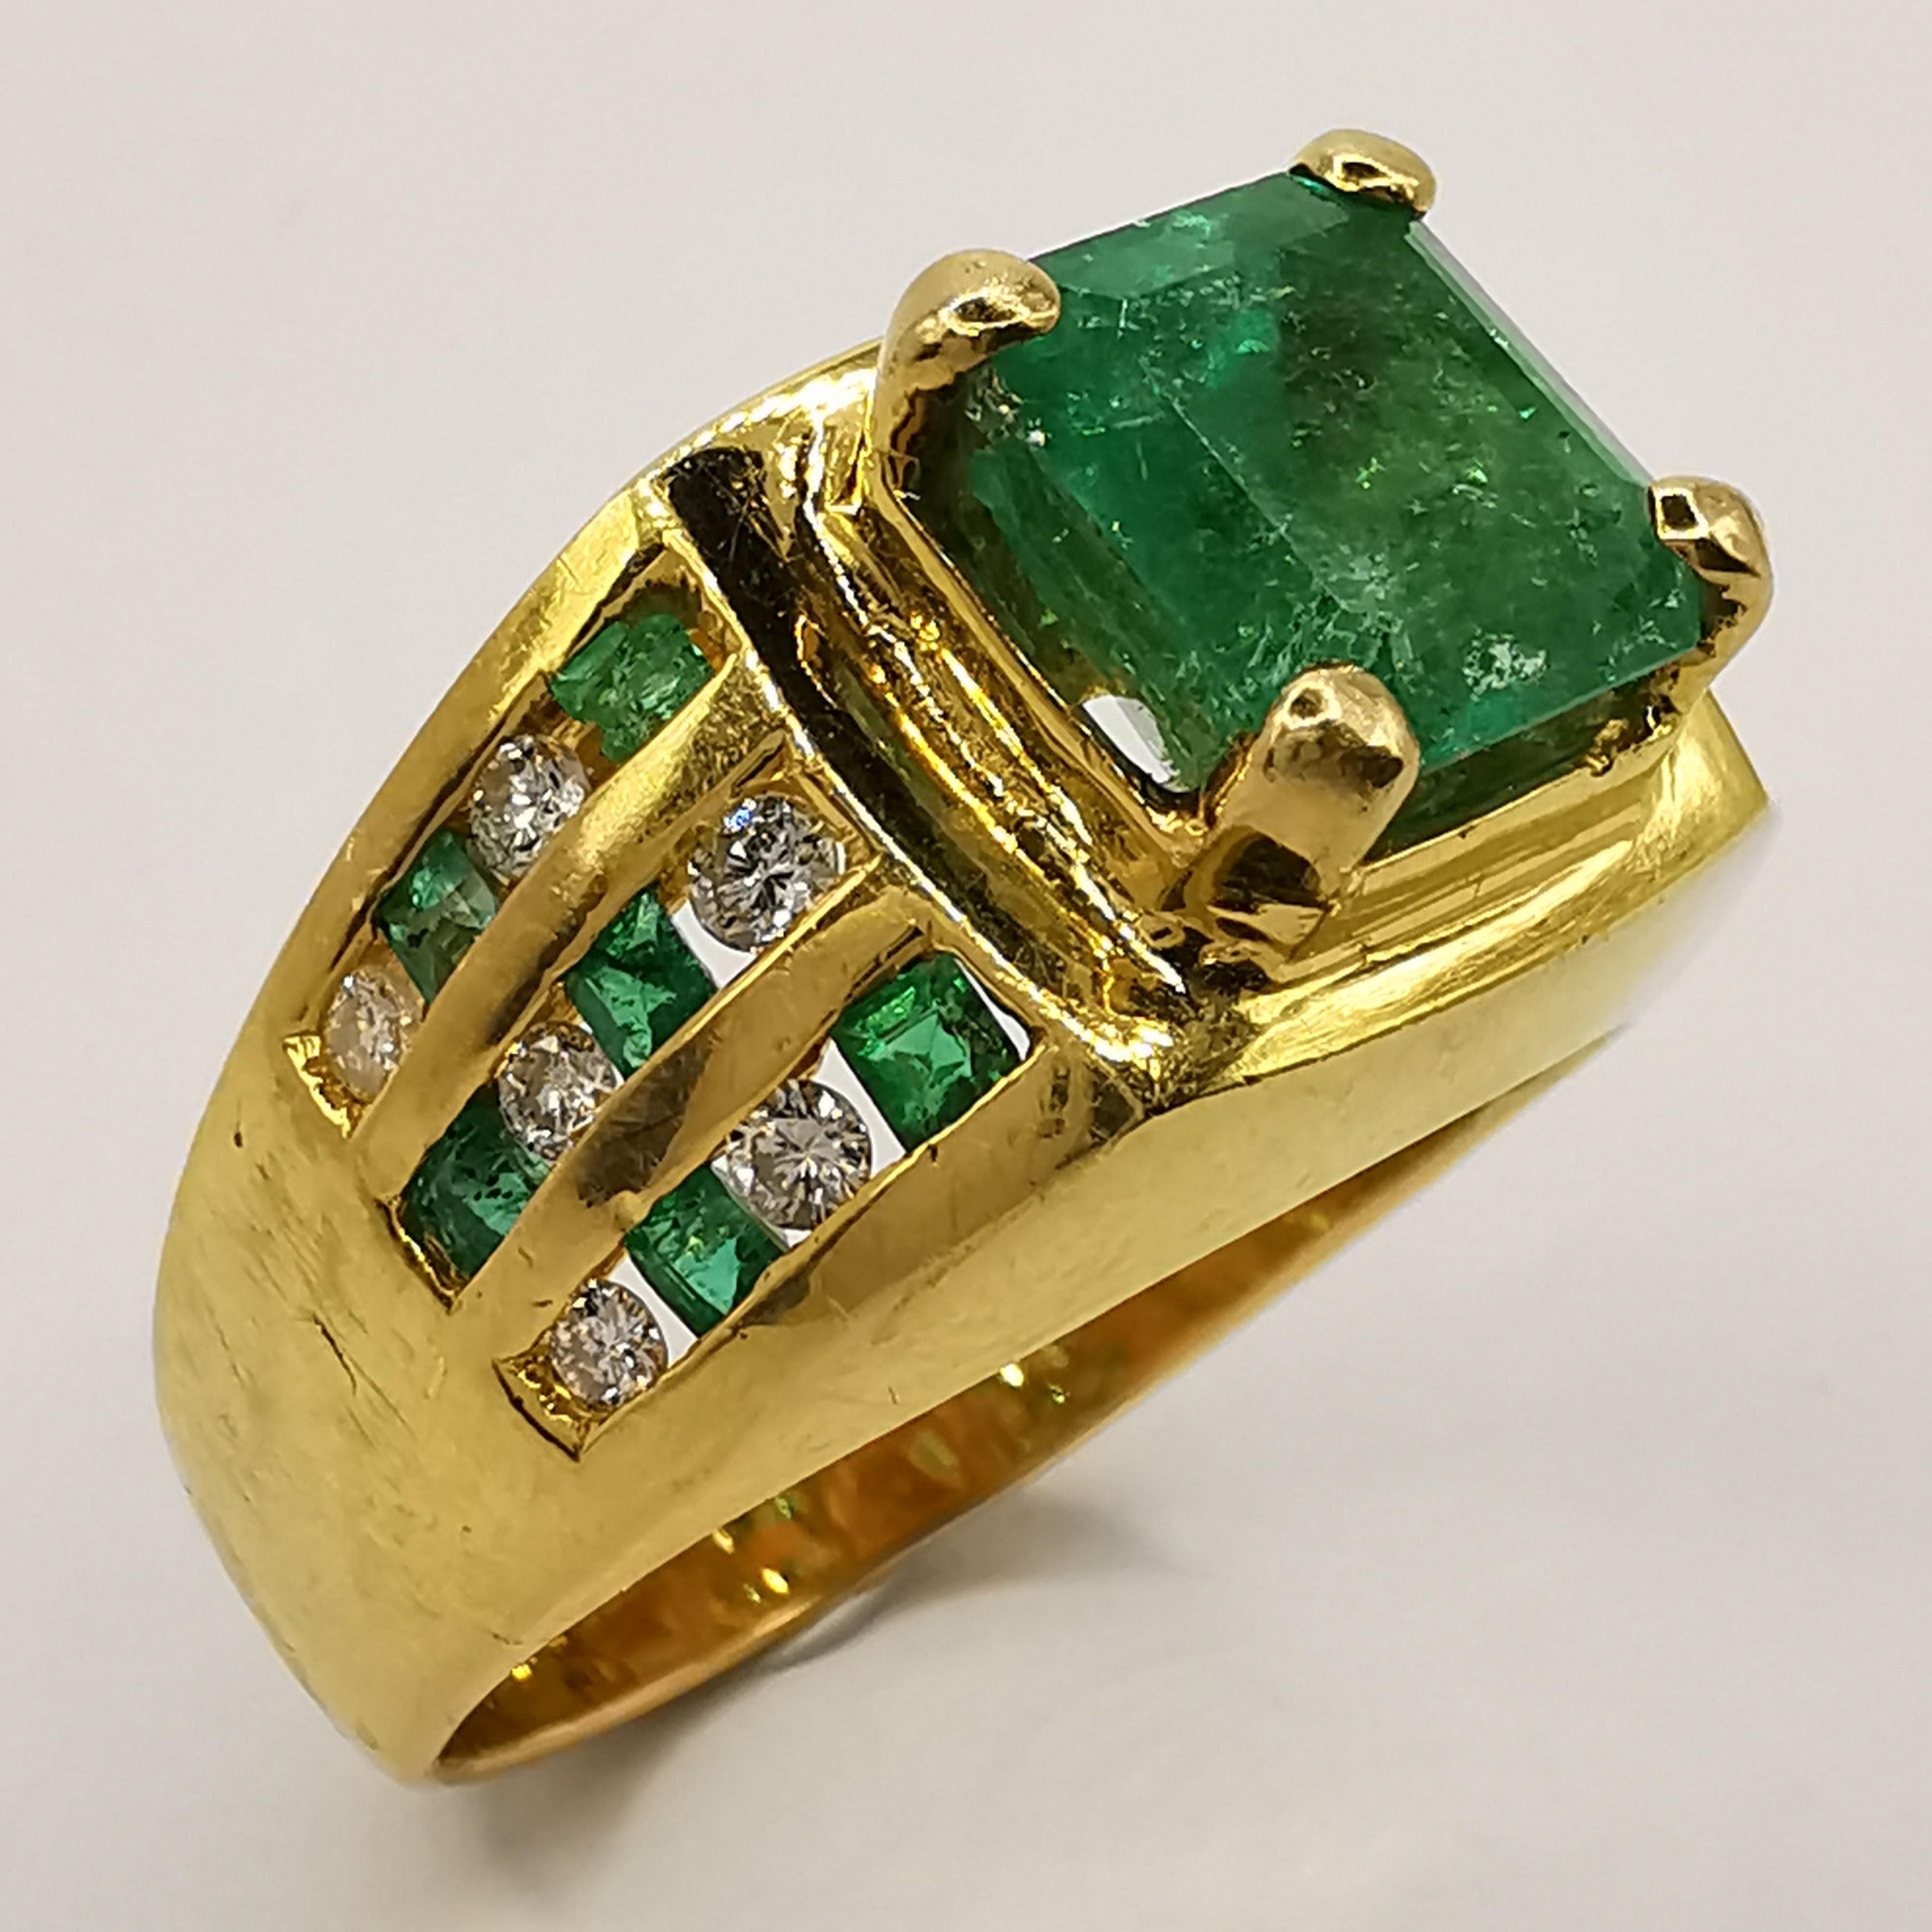 This stunning art deco fashion ring is the perfect choice for adding a touch of sophistication and glamour to your look. The ring features a 207 carat emerald cut emerald set in a diamond design, giving it a sparkling and eye-catching finish. The